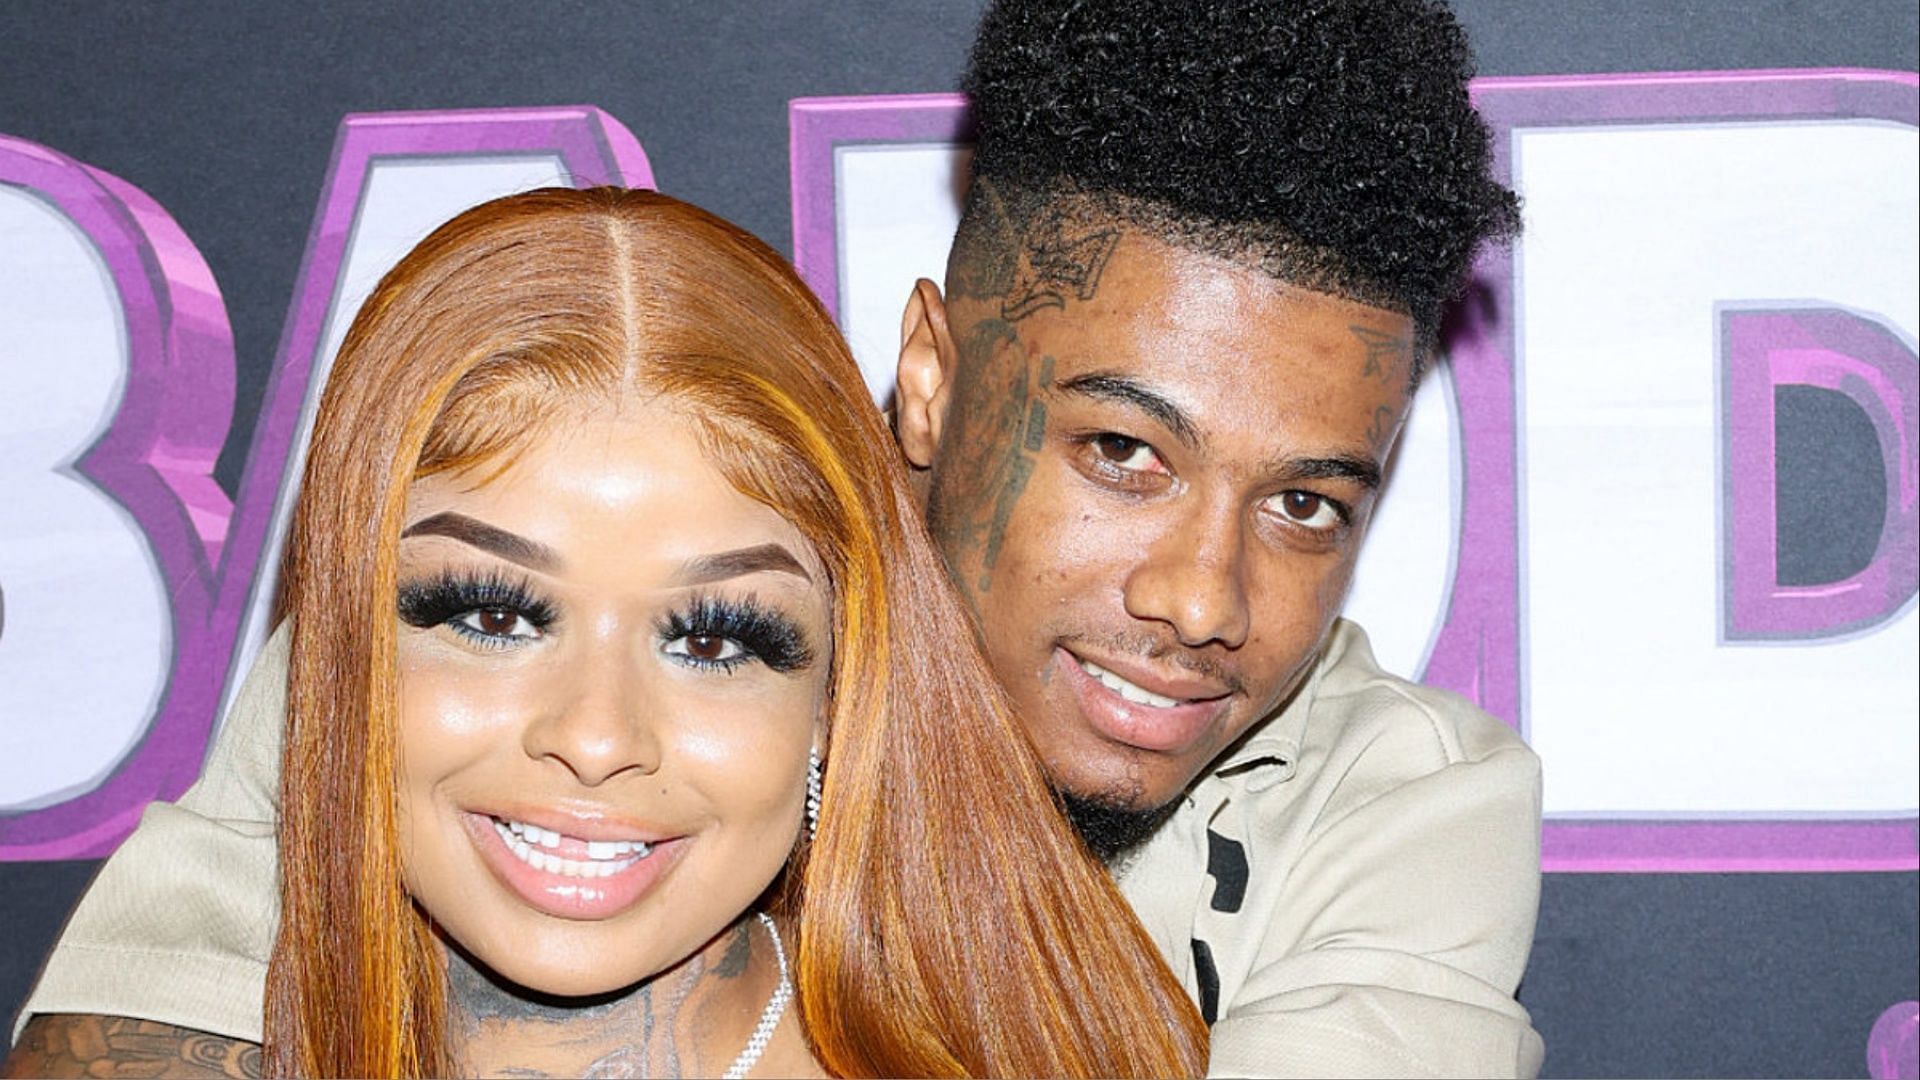 Blueface was slammed online after he was seen partying with his baby mama J...